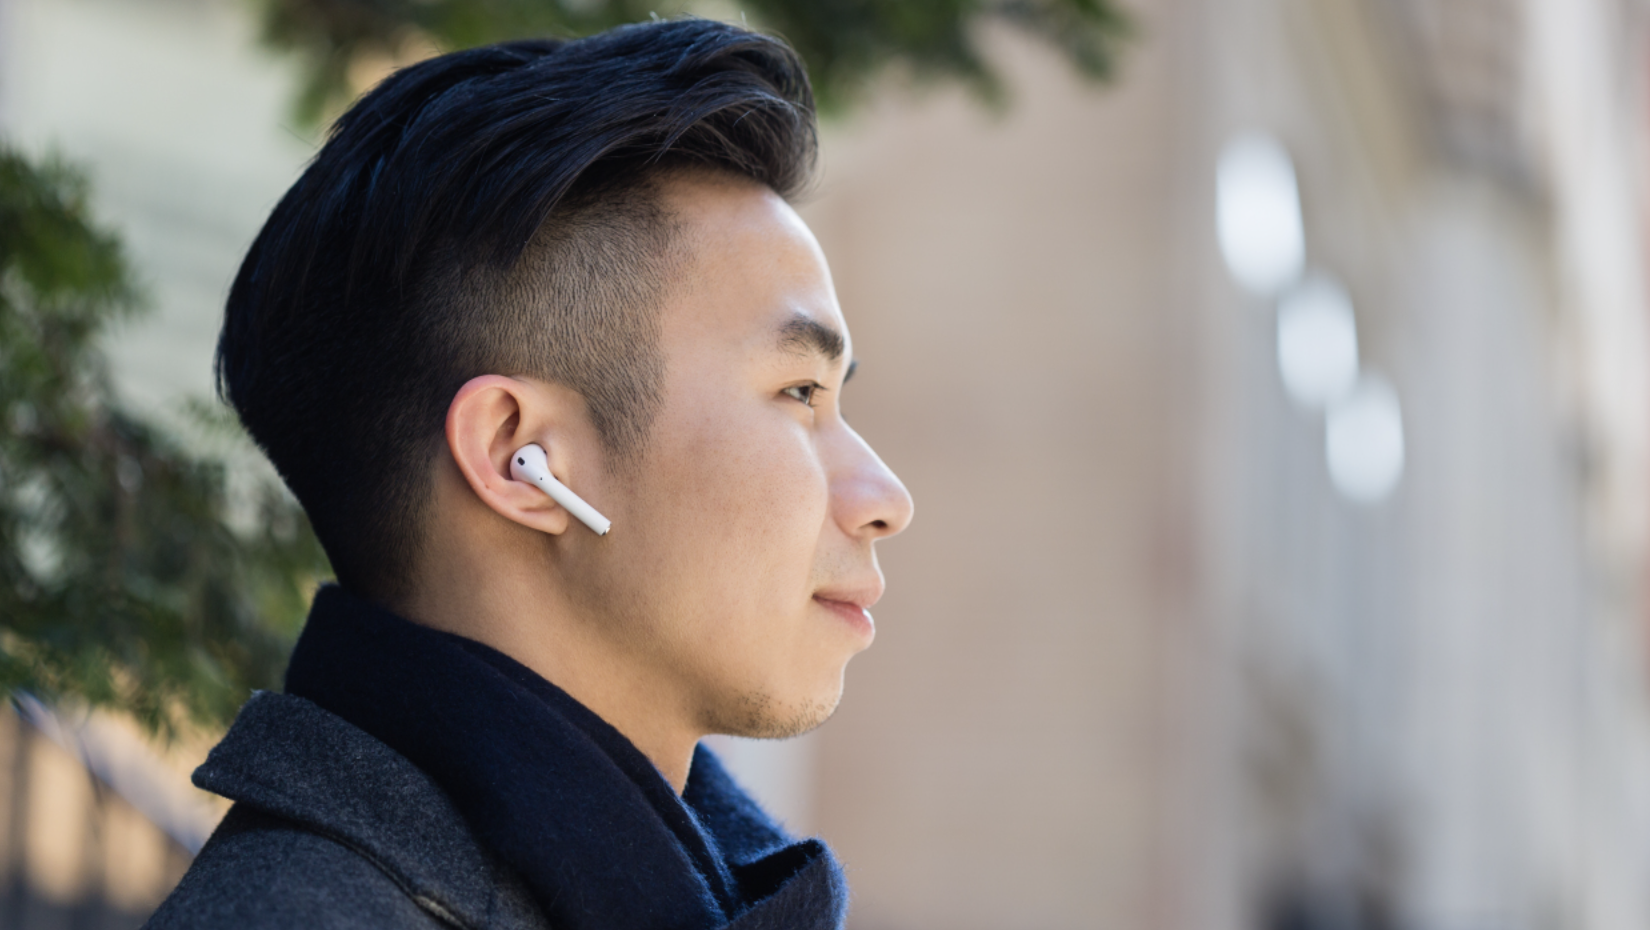 Save $15 on AirPods Pro (2nd generation) right now